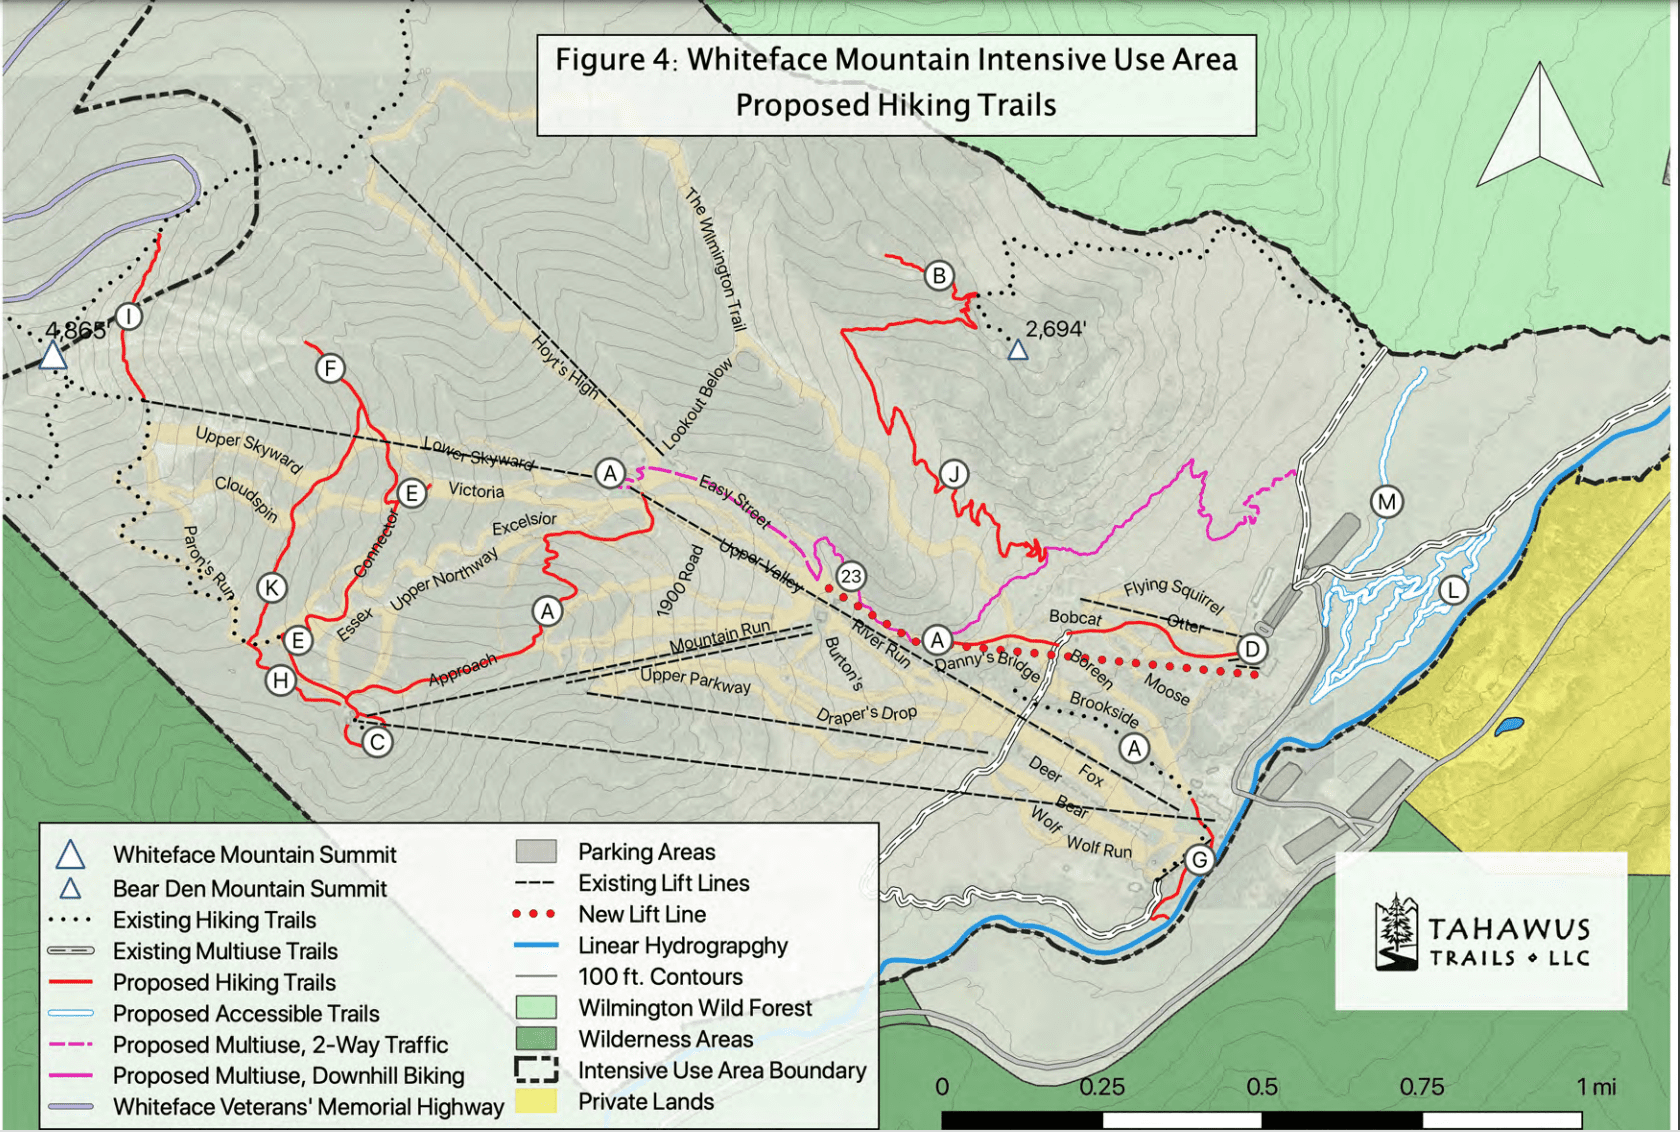 Proposed hiking trails for Whiteface Mountain